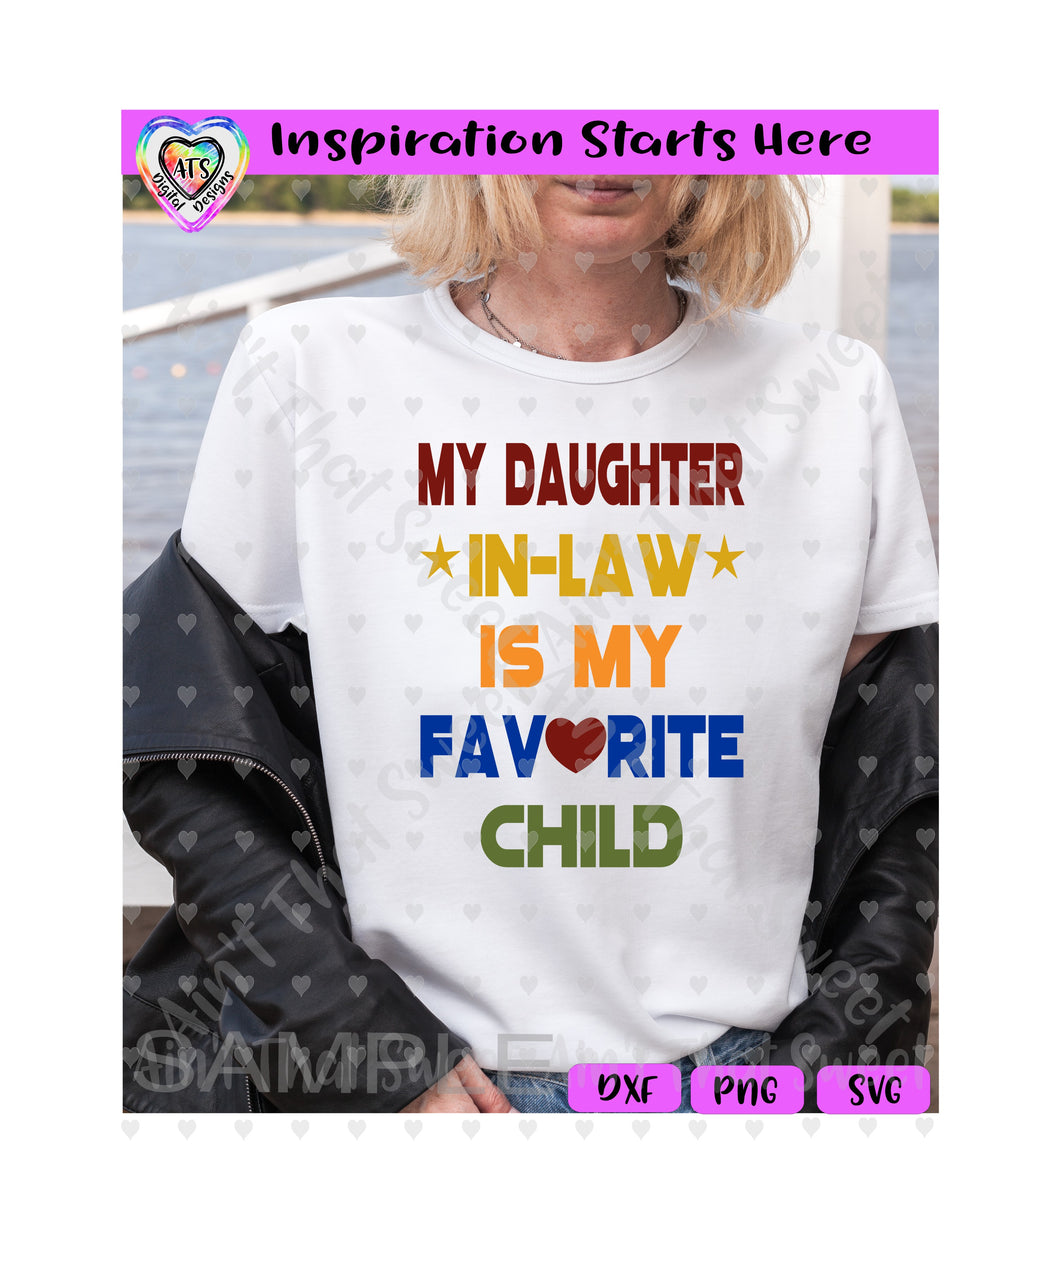 My Daughter-In-Law Is My Favorite Child - Transparent PNG SVG DXF - Silhouette, Cricut, ScanNCut